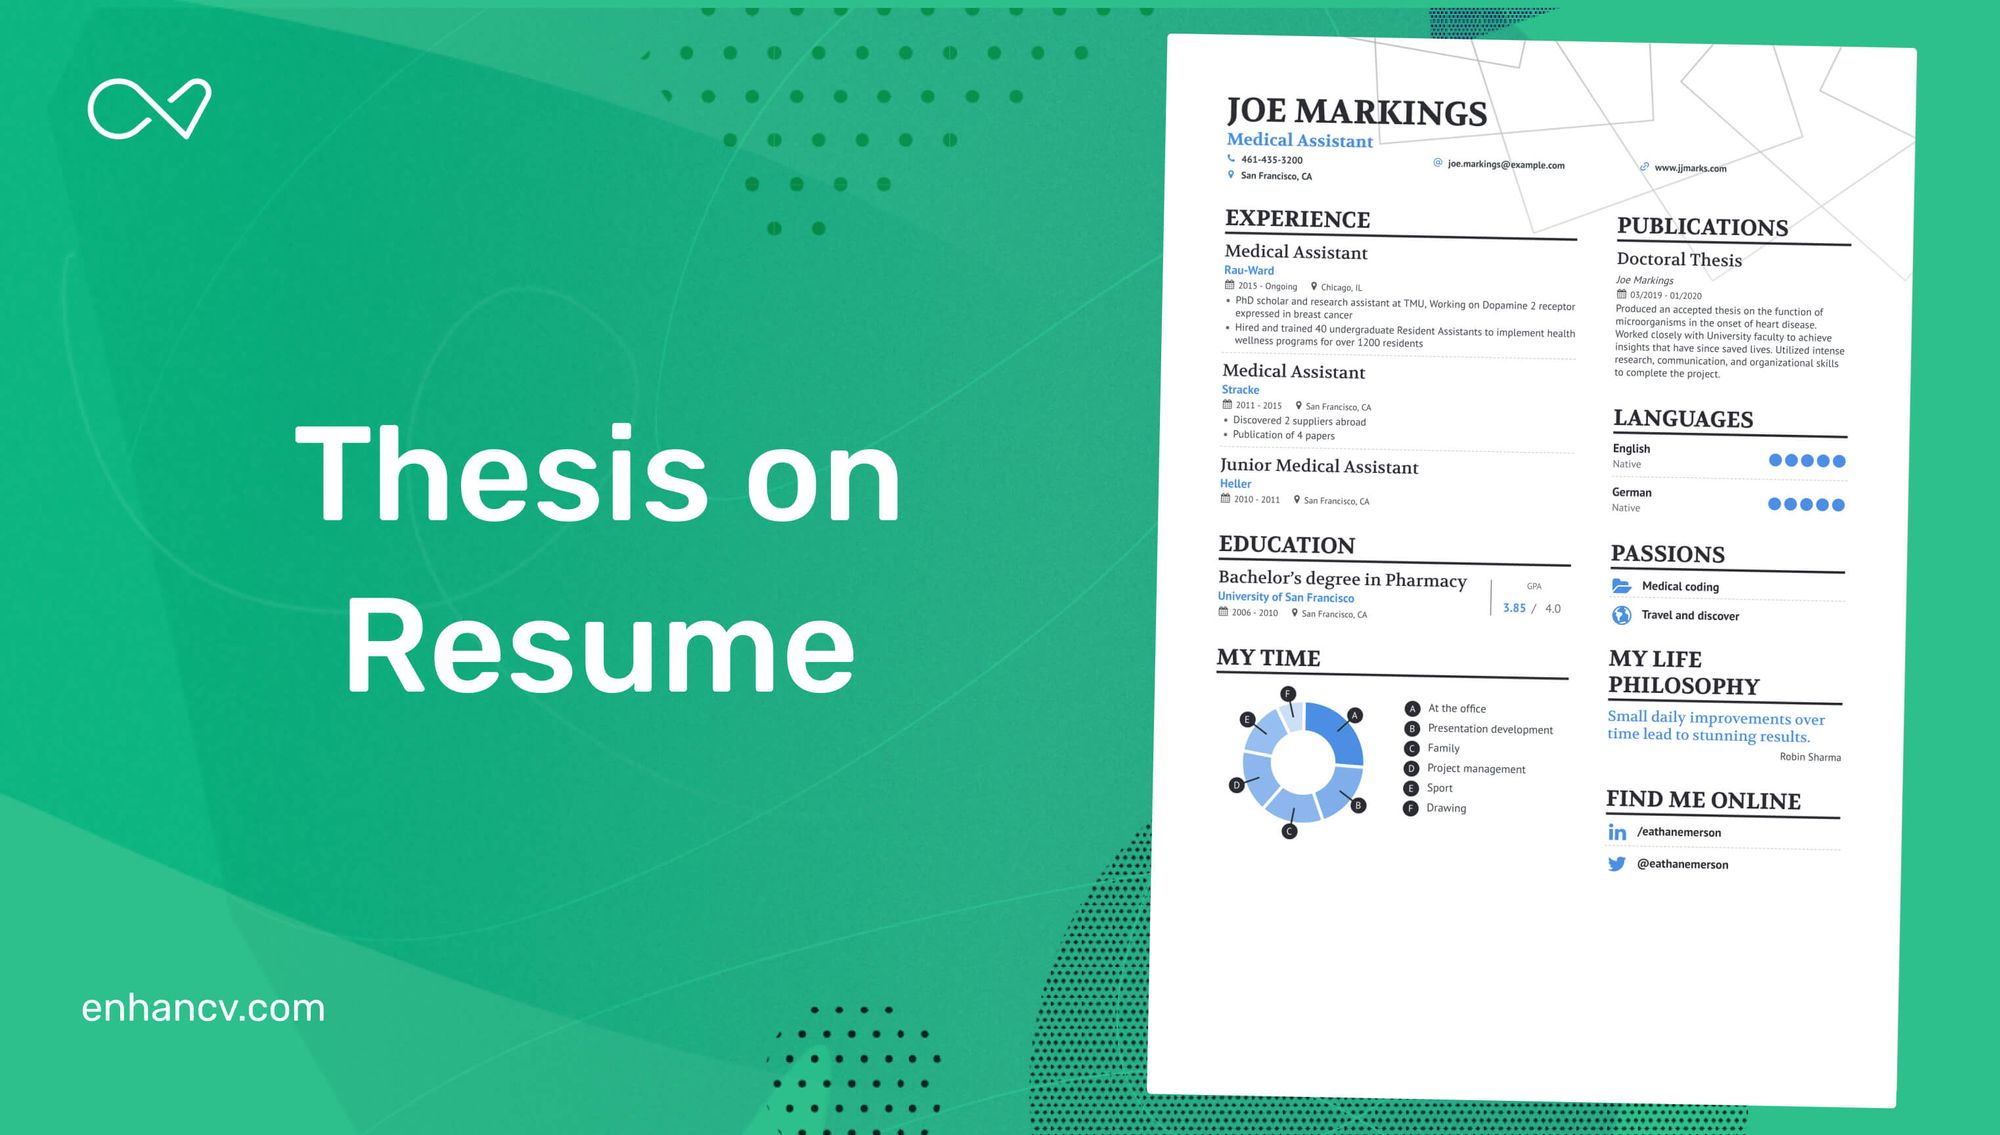 listing thesis on resume